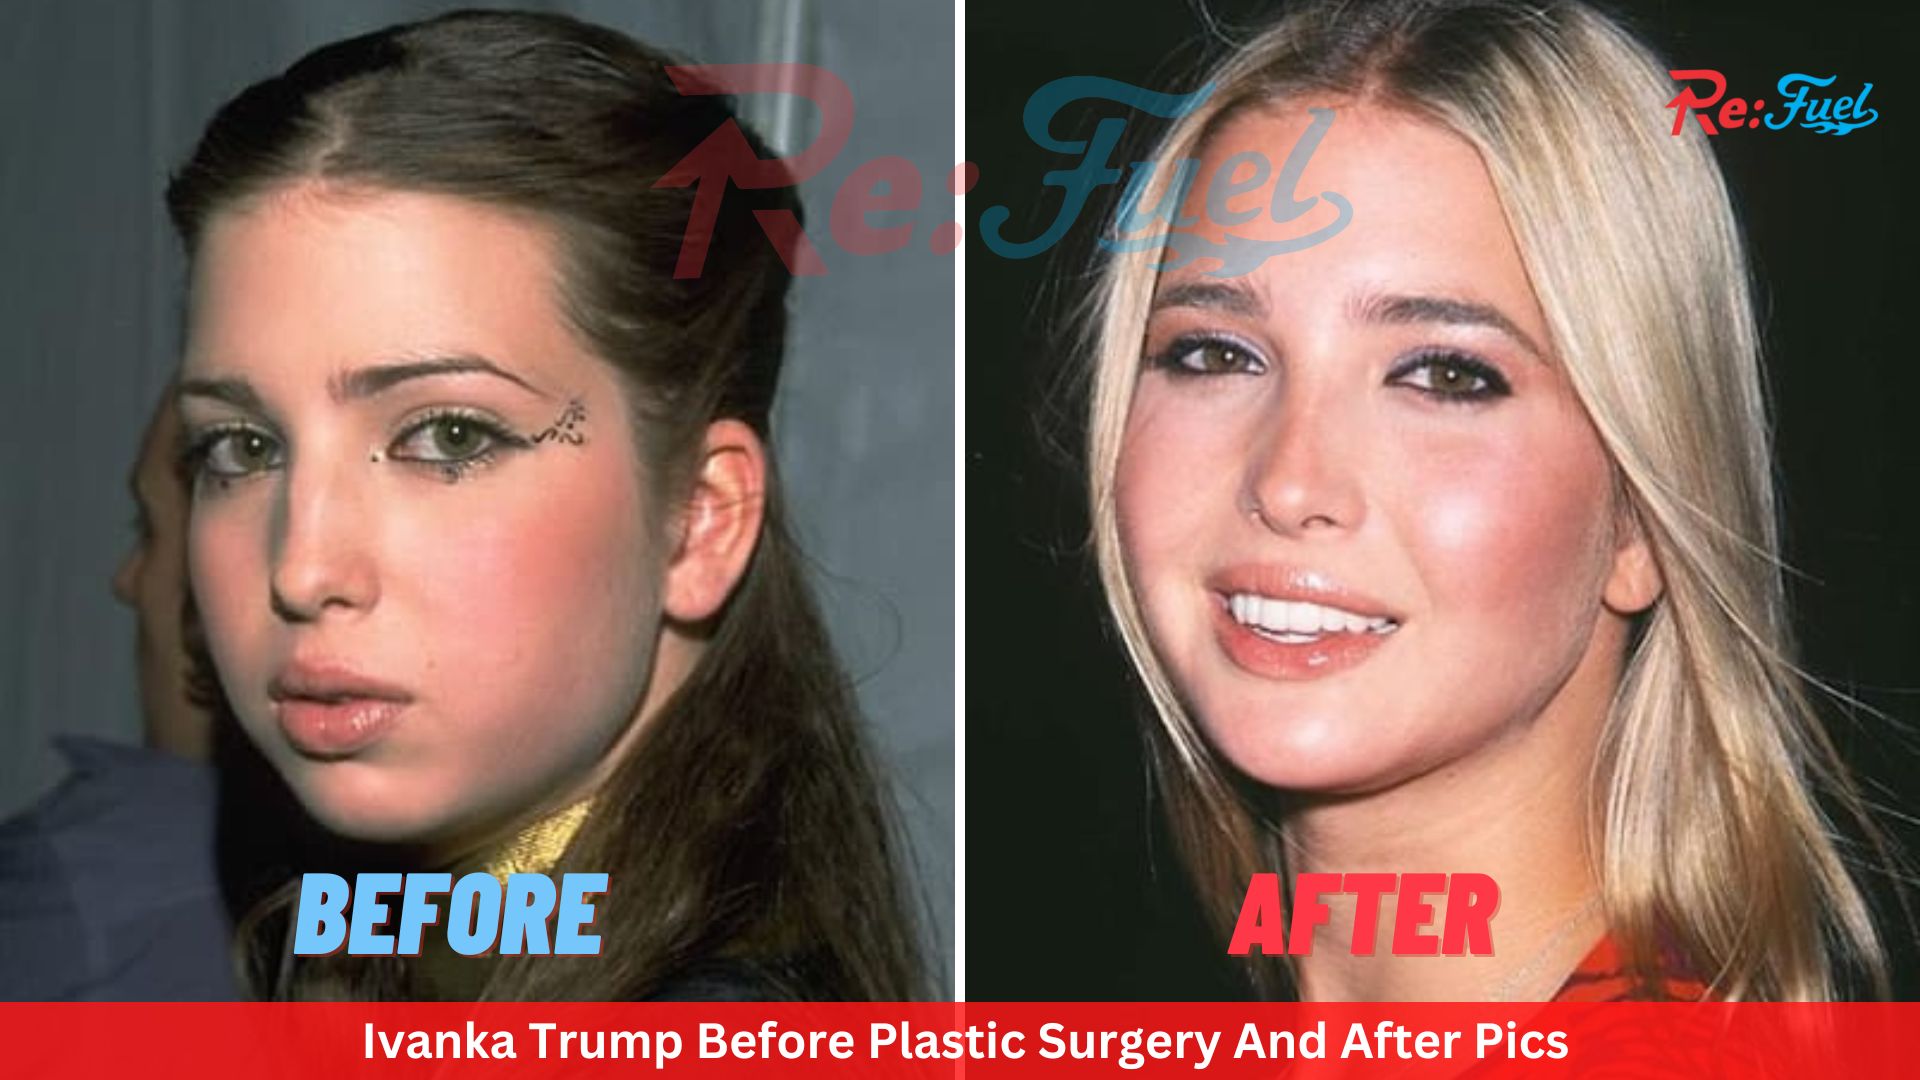 Ivanka Trump Before Plastic Surgery And After Pics